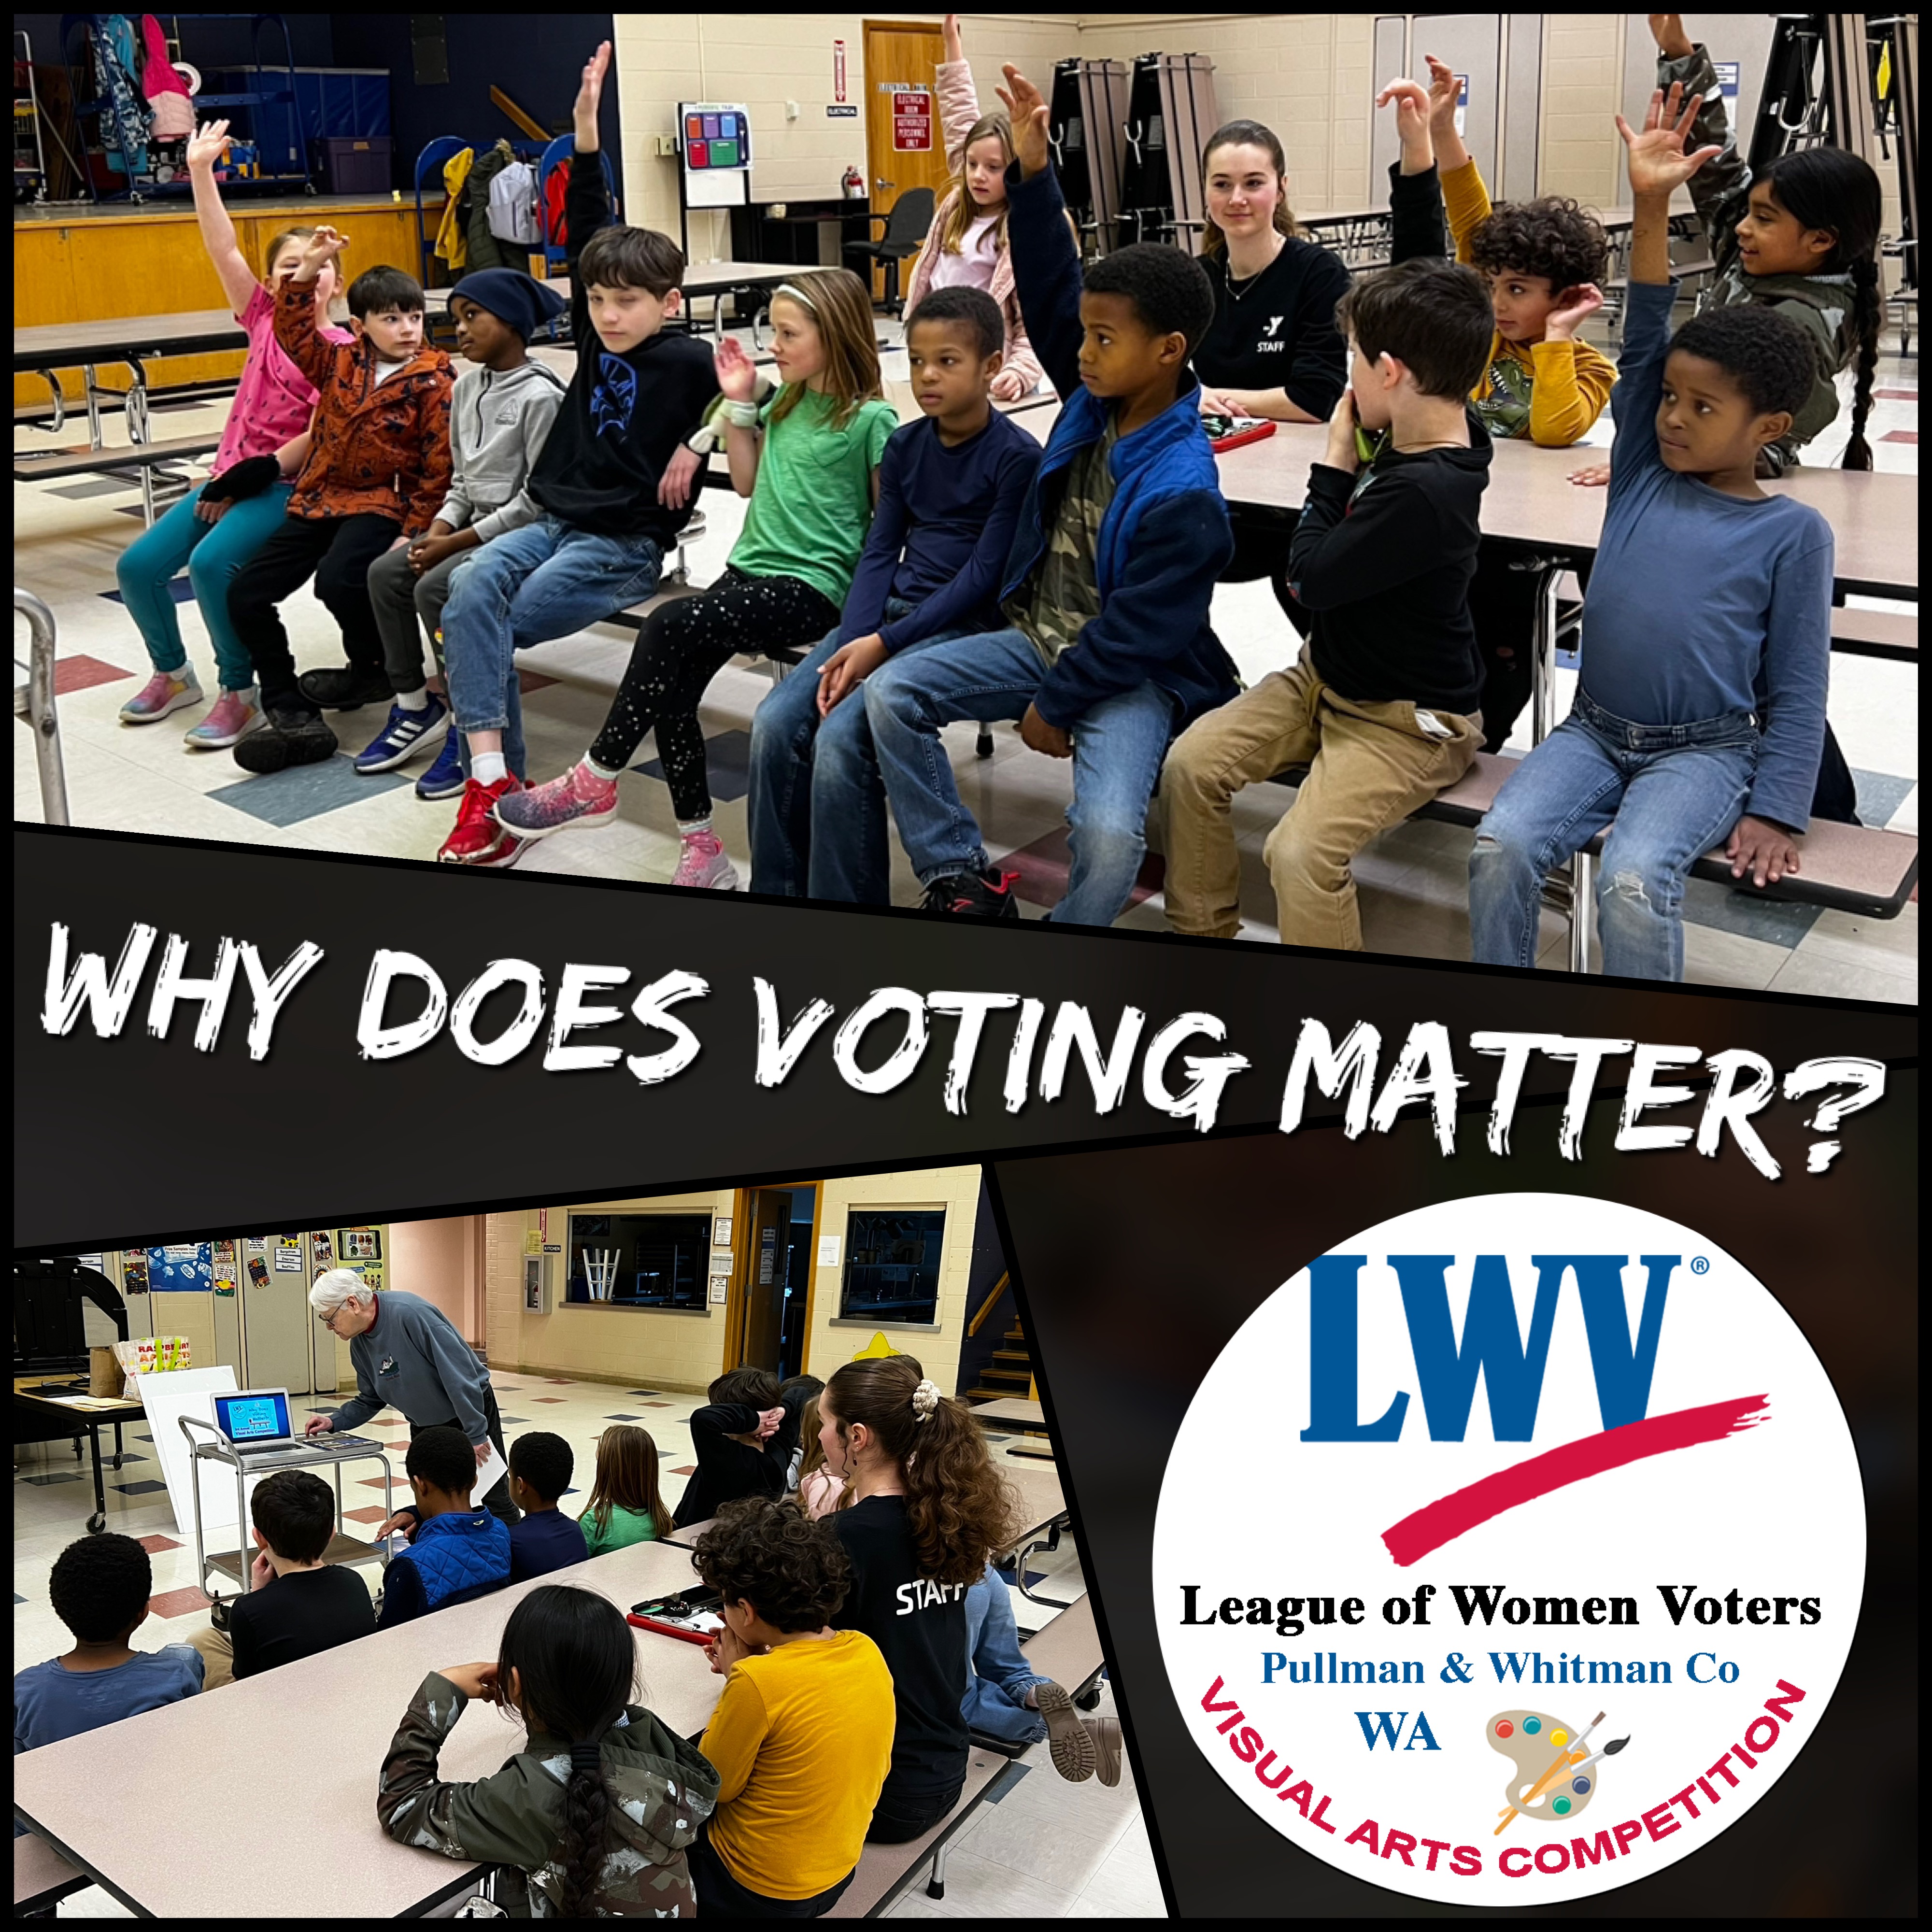 Picture collage of elementary students listening to a program about why voting matters and raising their hands to vote, with a LWV button for the visual arts competition.